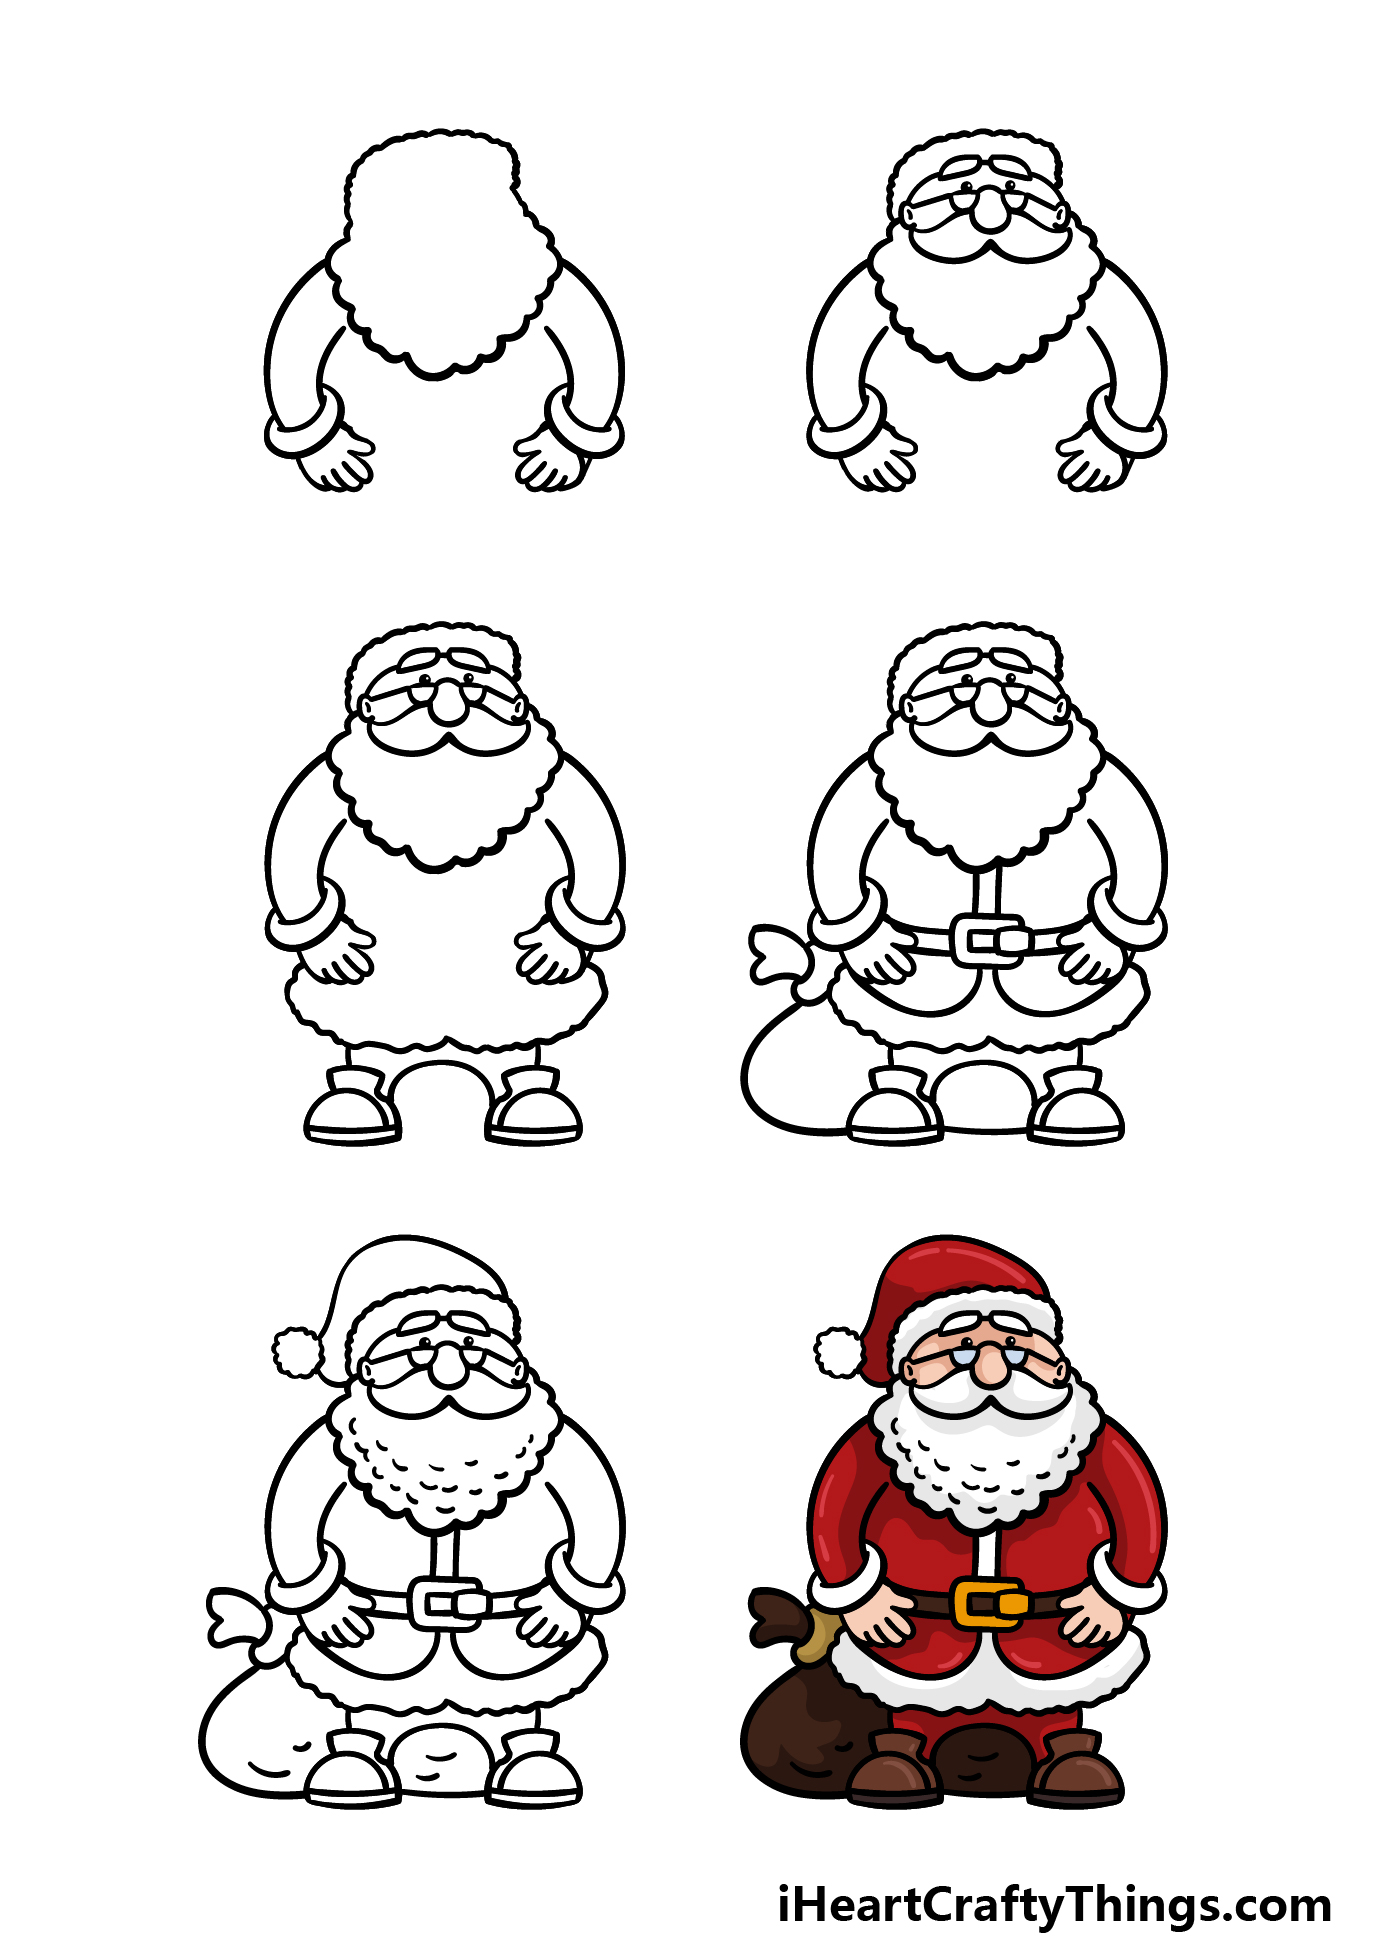 how to draw a cartoon Santa in 6 steps